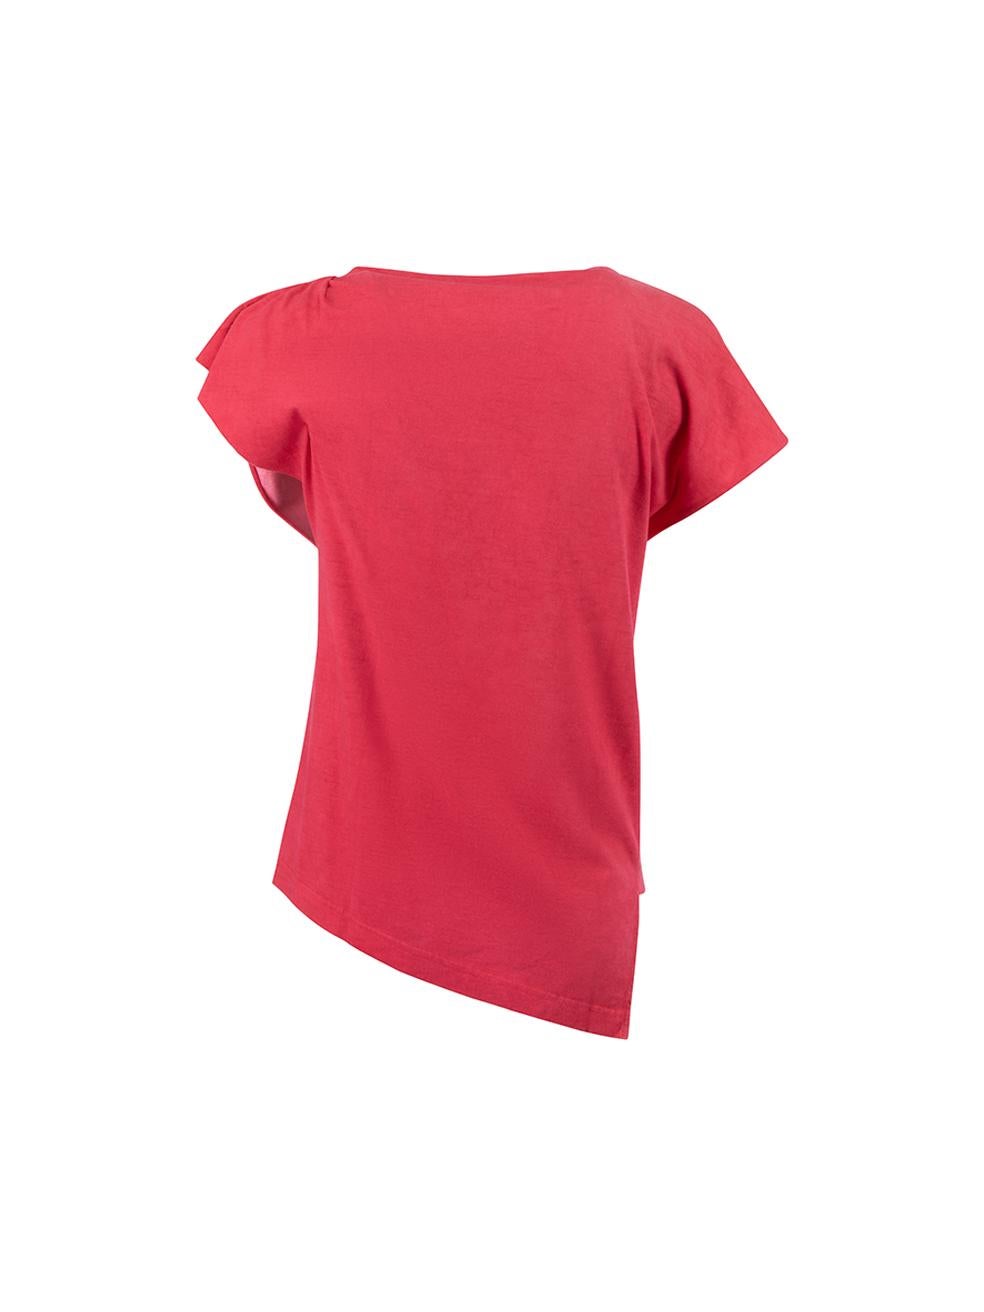 Isabel Marant Women's Pink Cap Sleeve Asymmetric Top In Excellent Condition For Sale In London, GB